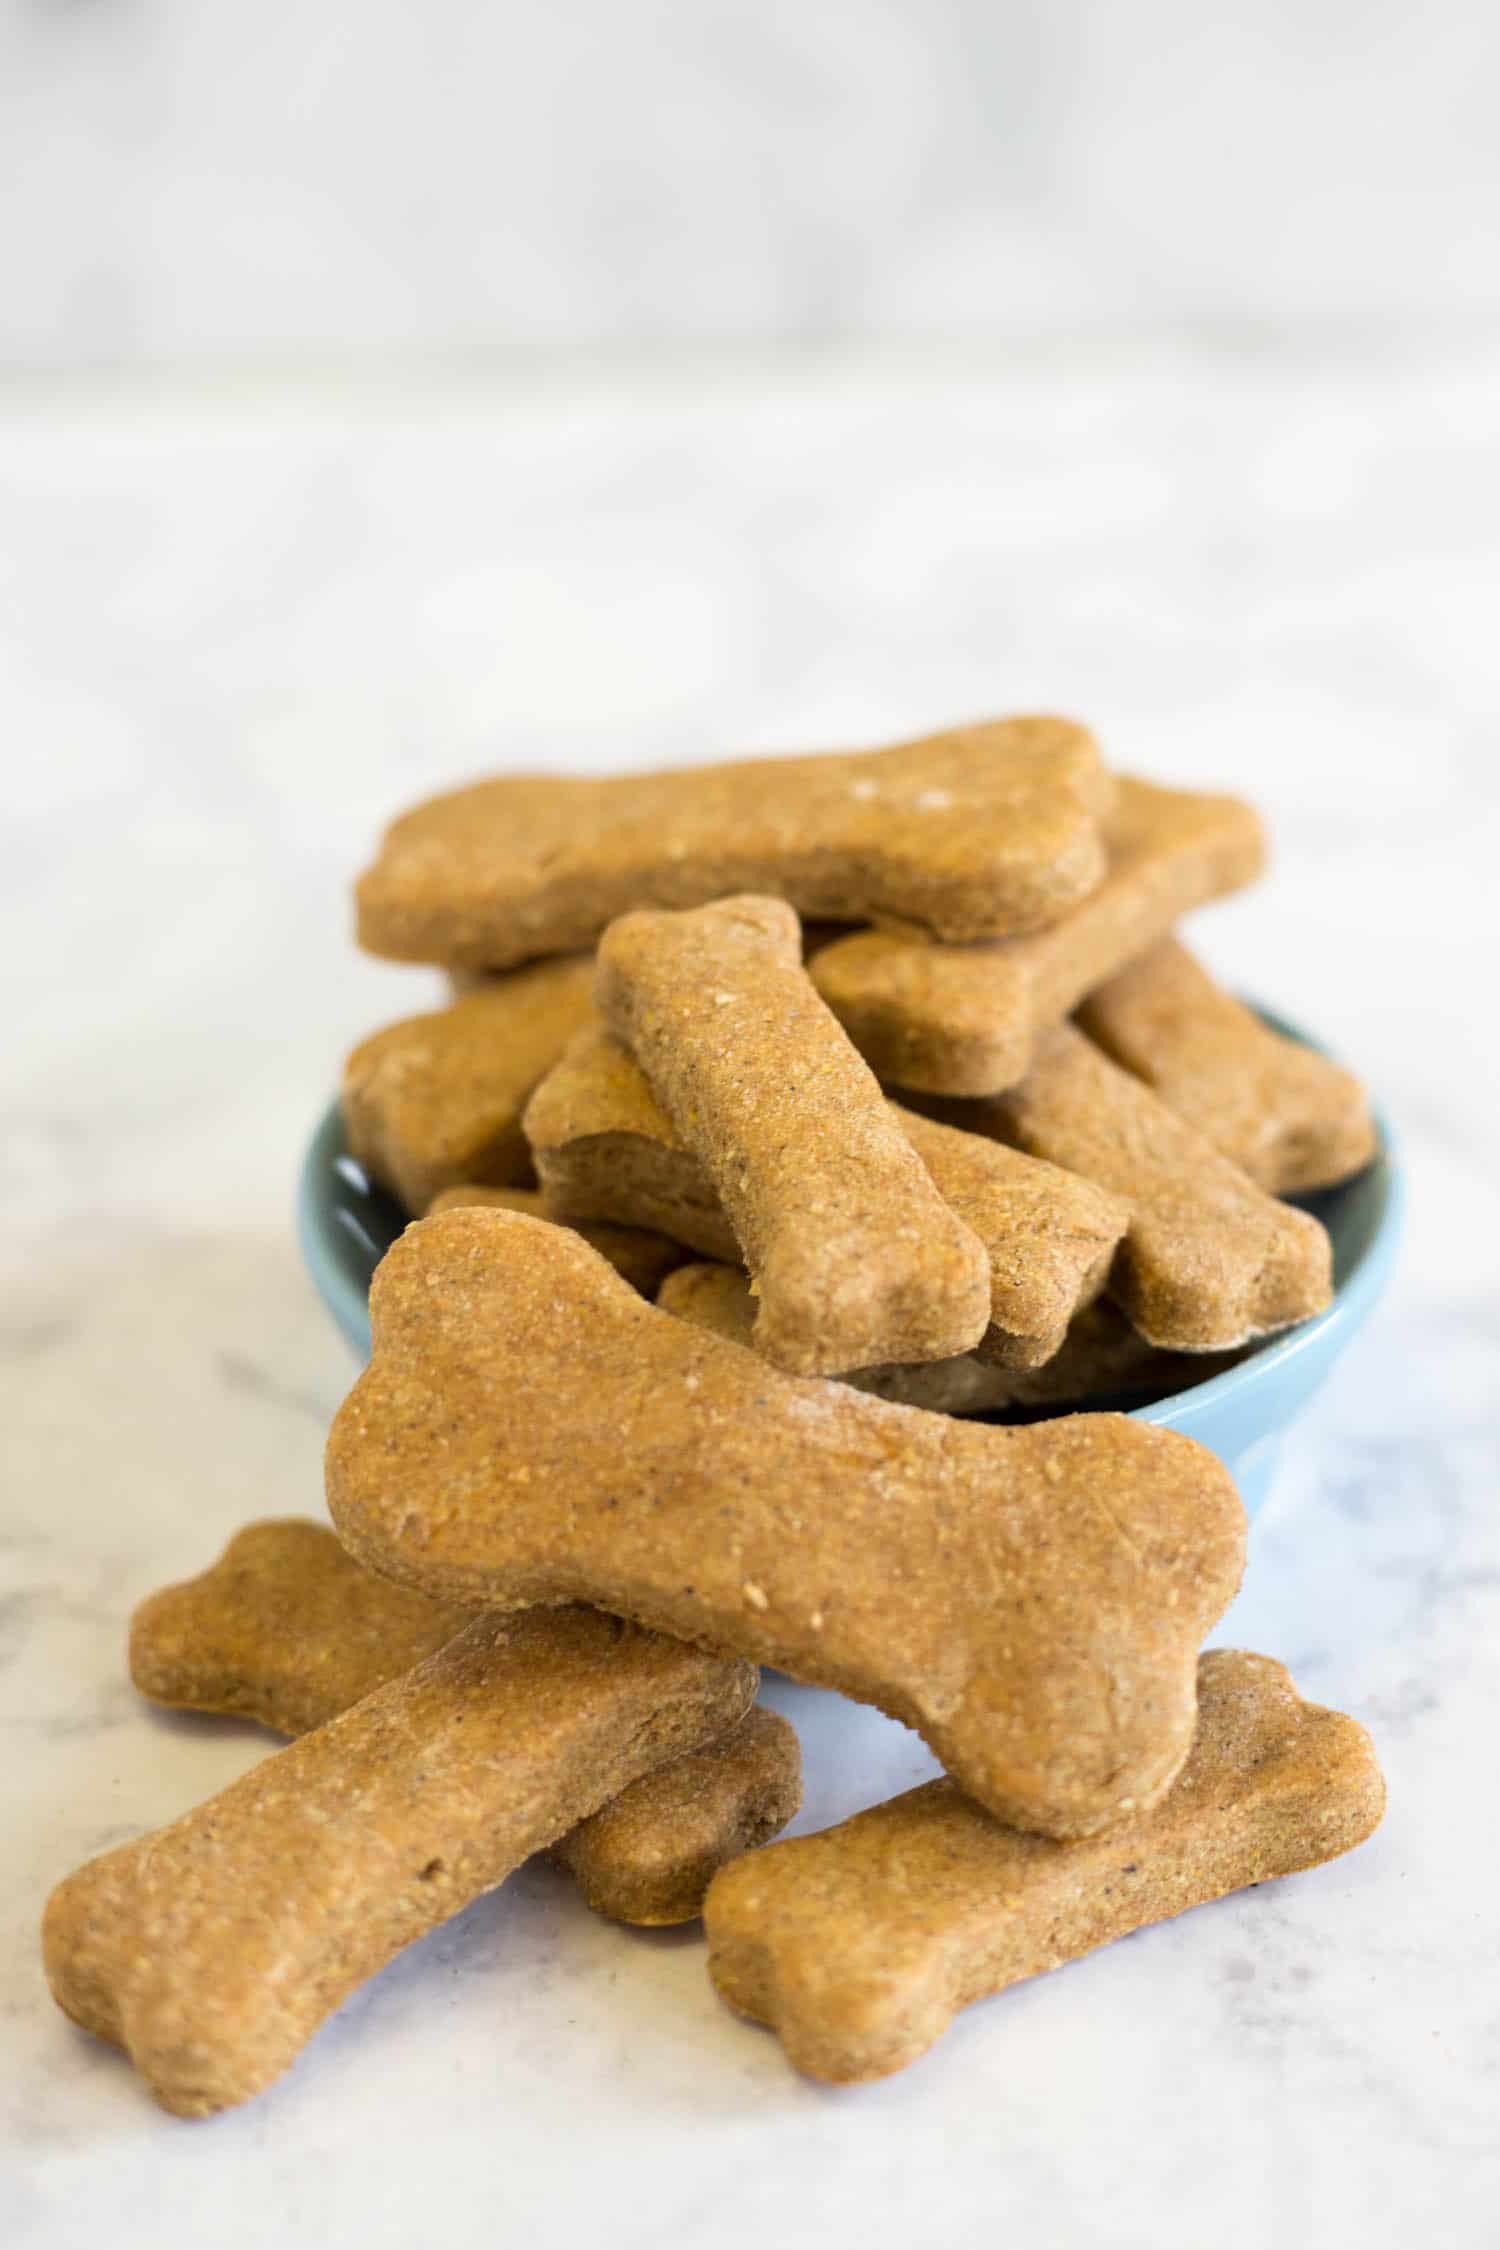 Homemade Dog Biscuits - Artzy Foodie